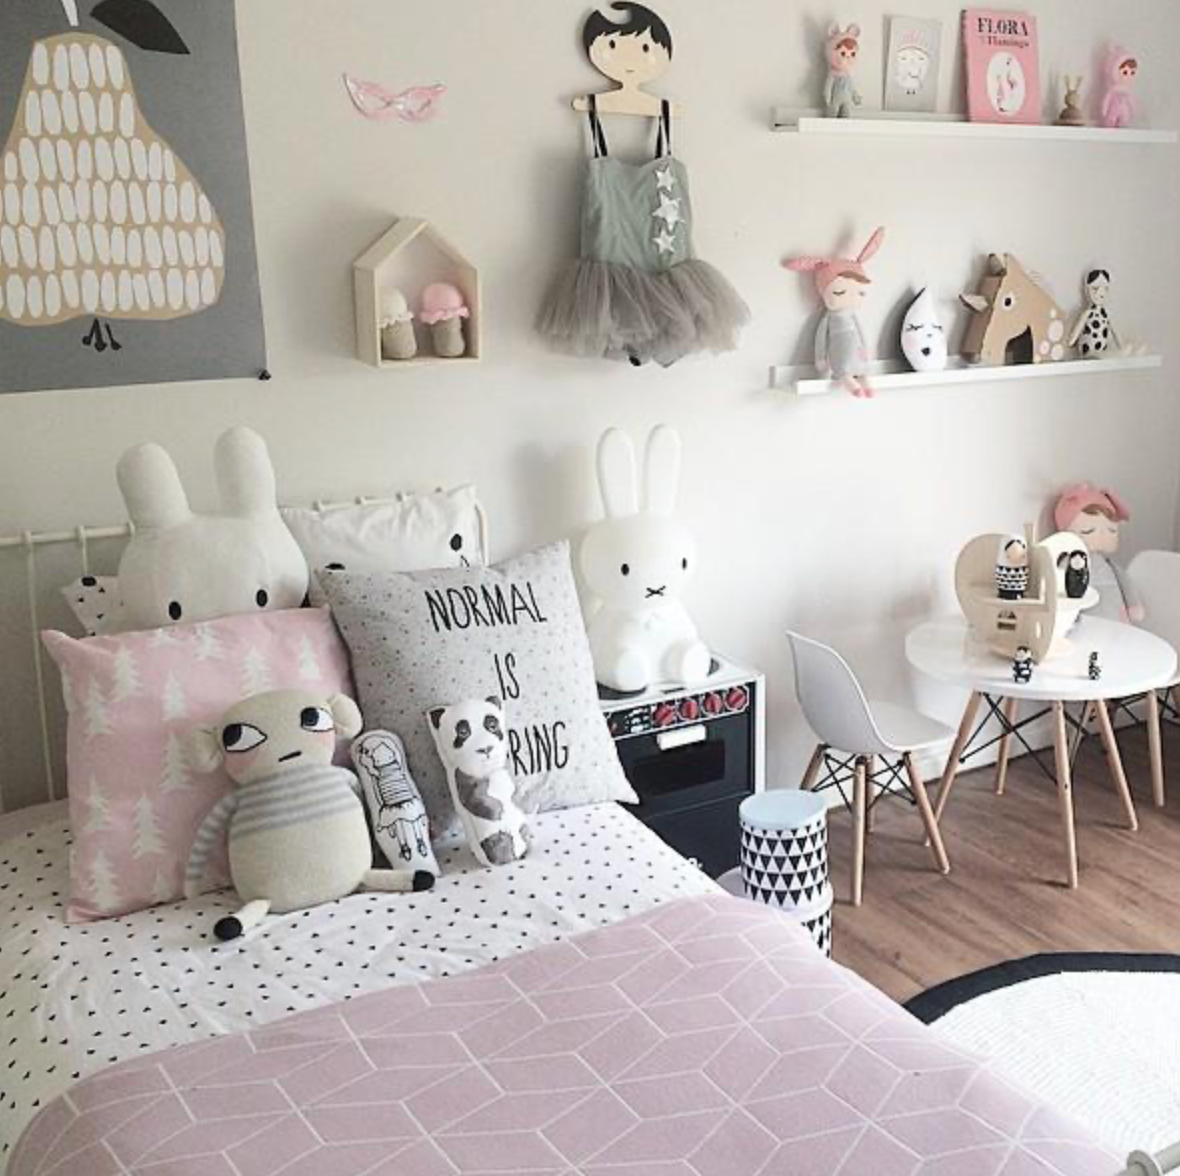 15 Pink and Gray Bedroom Ideas - Decorating With Pink and Gray